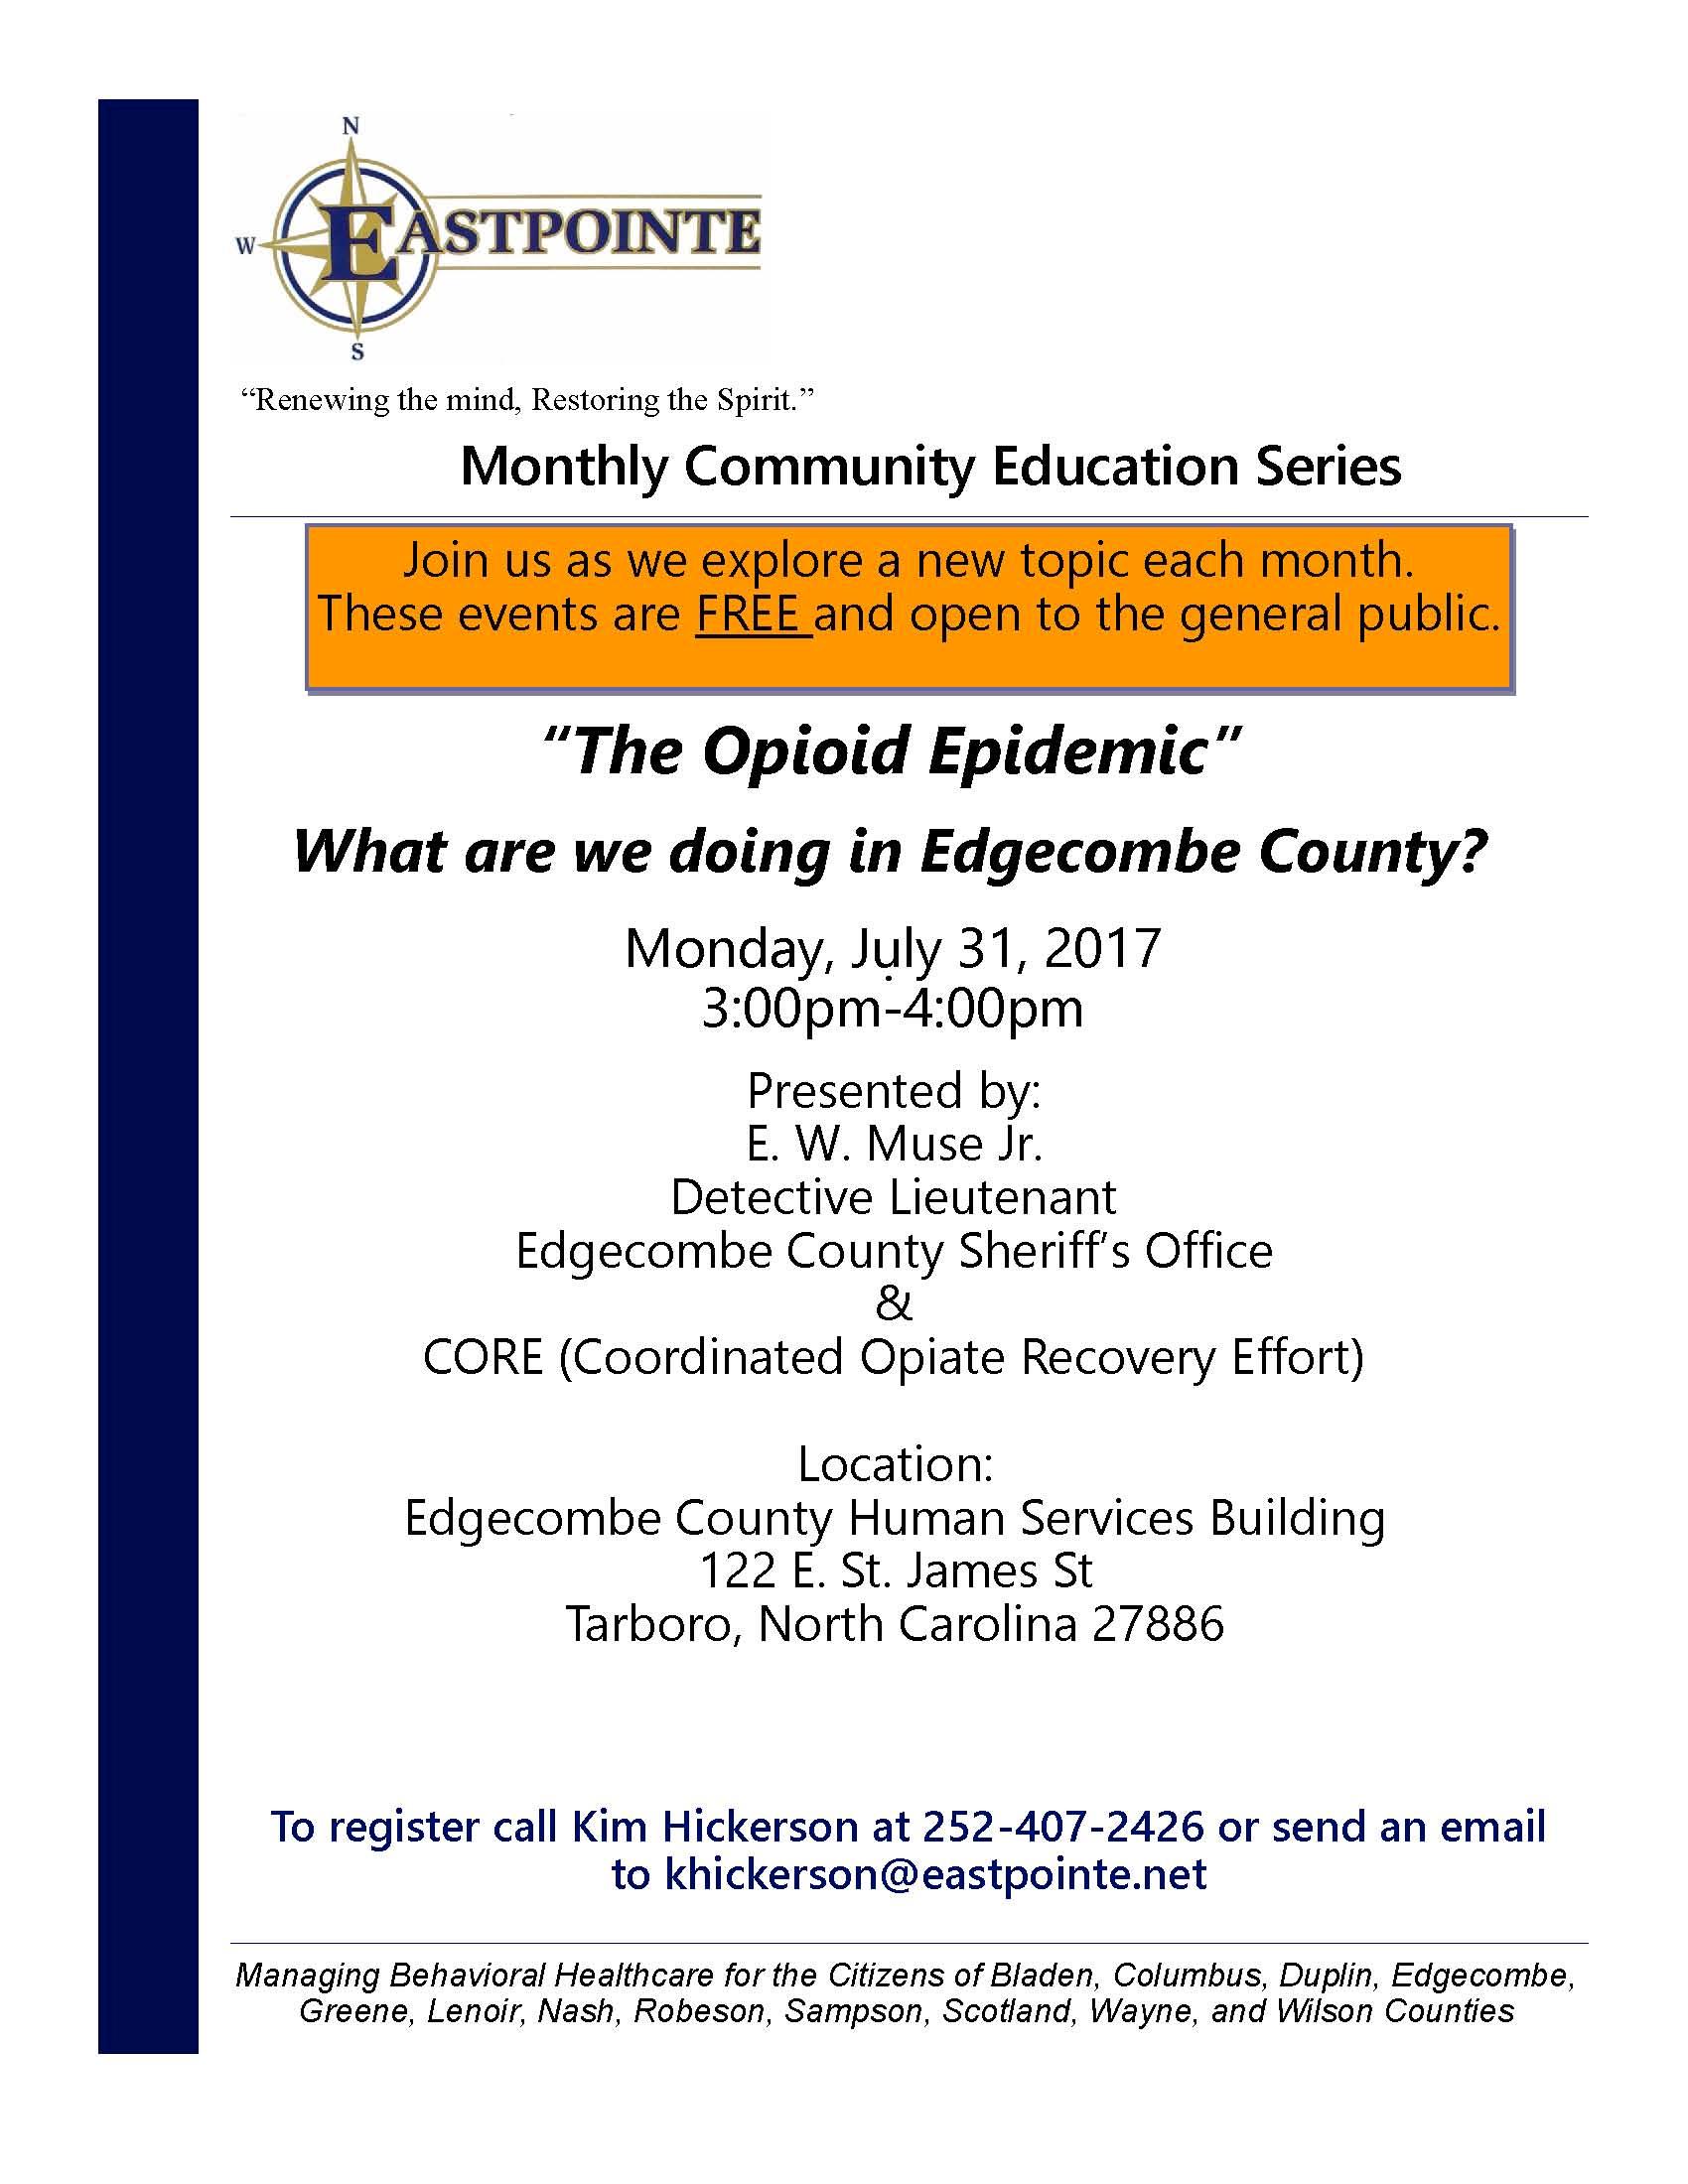 2017 Edgecombe education series flyer July 072017 - Copy